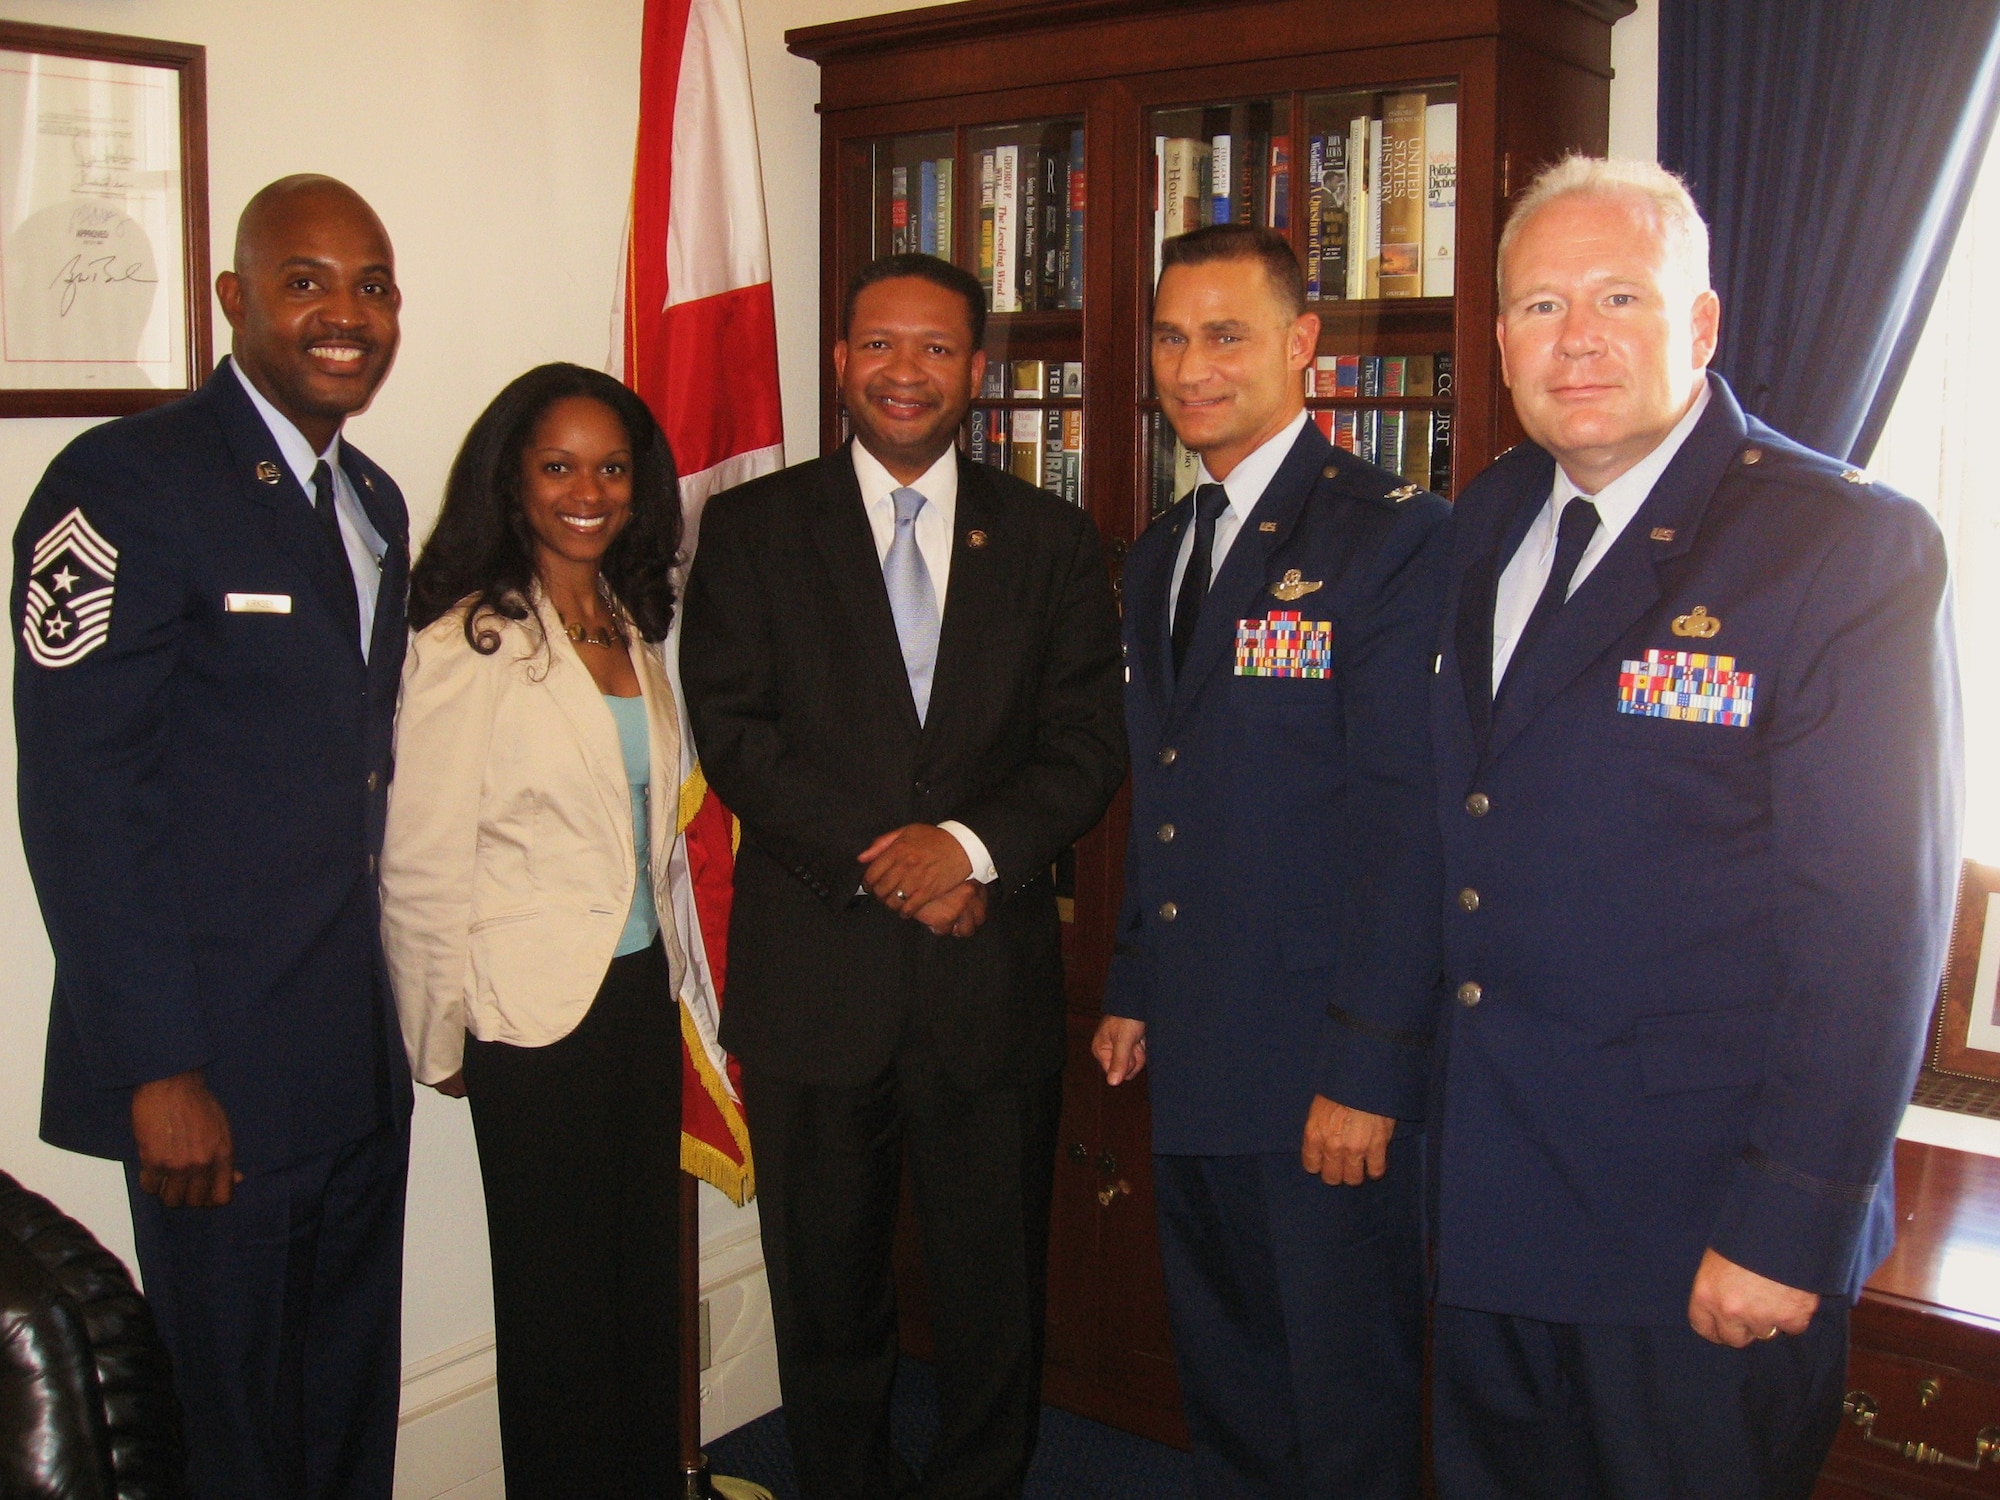 Leaders of the 908th Airlift Wing recently traveled to Washington, D.C. to discuss important issues with members of Alabama's Congressional delegation, an annual requirement for wing commanders. Command Mast Chief Cameron Kirksey, Wing commander Col. Brett Clark and Public Affairs Chief Lt. Col. Jerry Lobb pose for a photograph with Representative Artur Davis of the Alabama 7th Congressional District and a member of his staff.